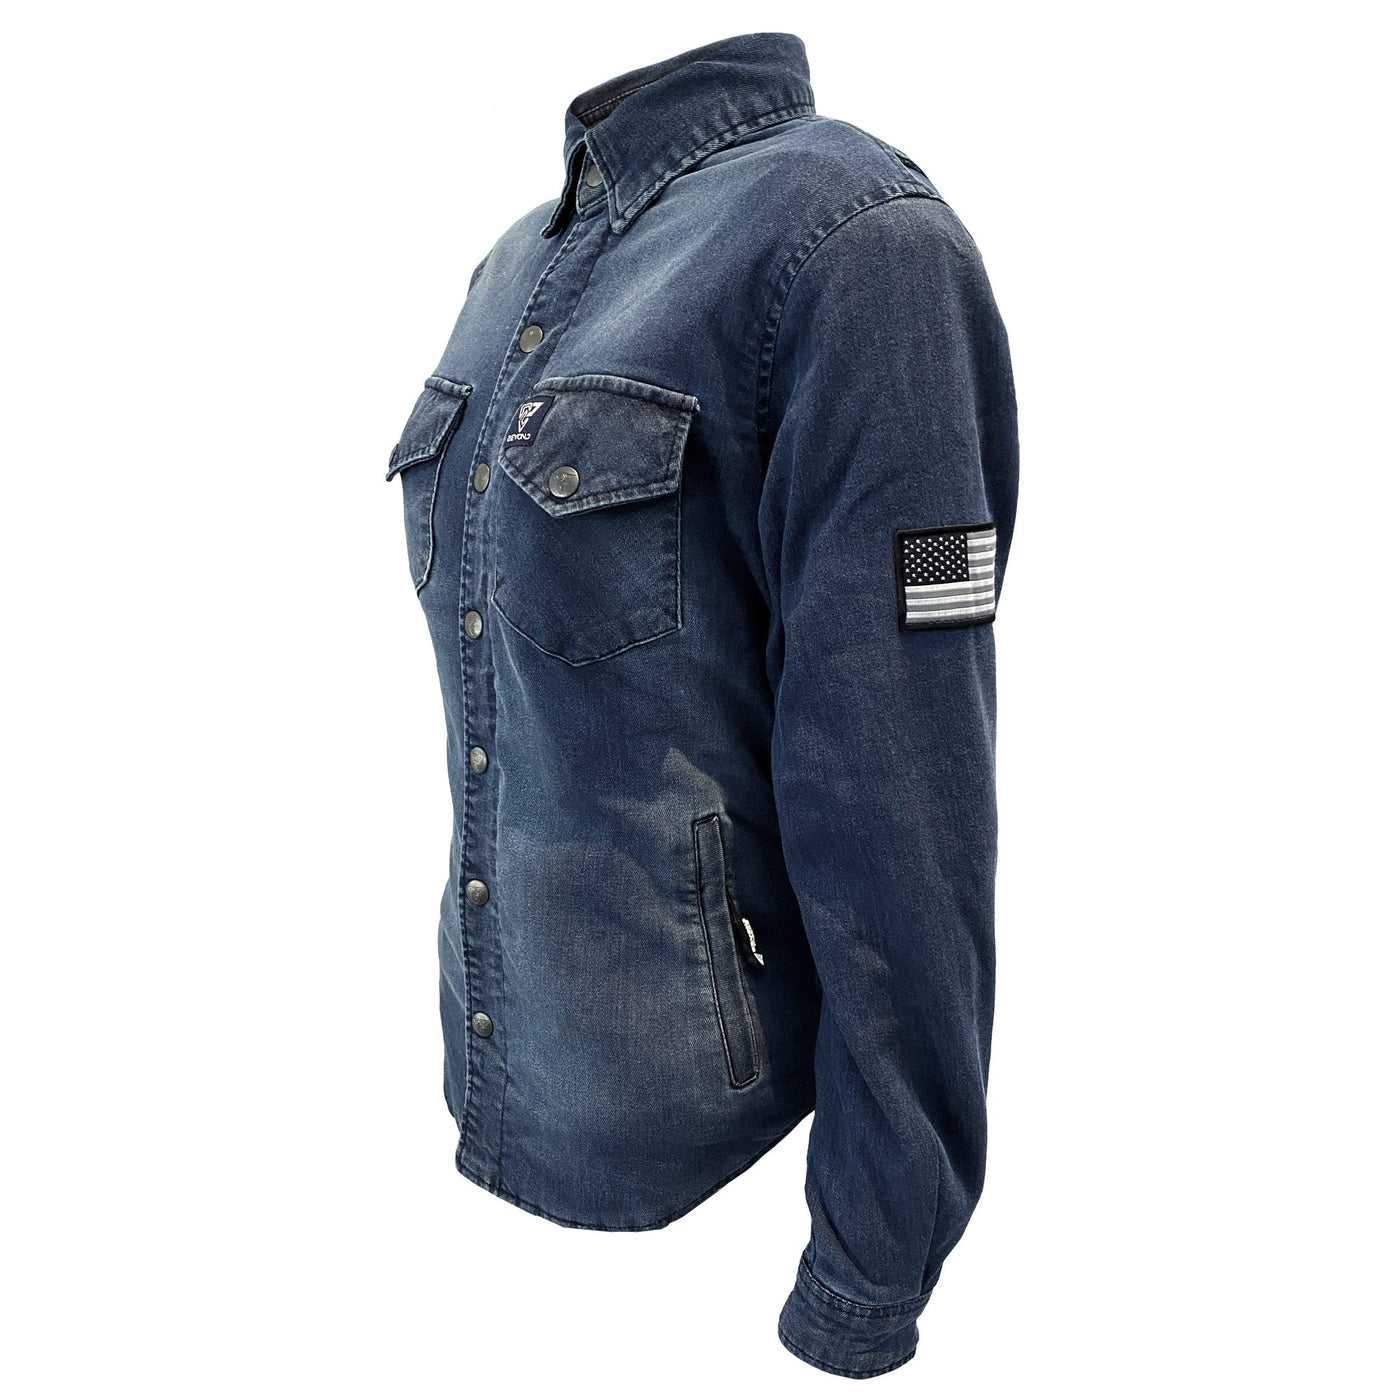 Protective Jeans Jacket with Pads for Women - Faded Blue